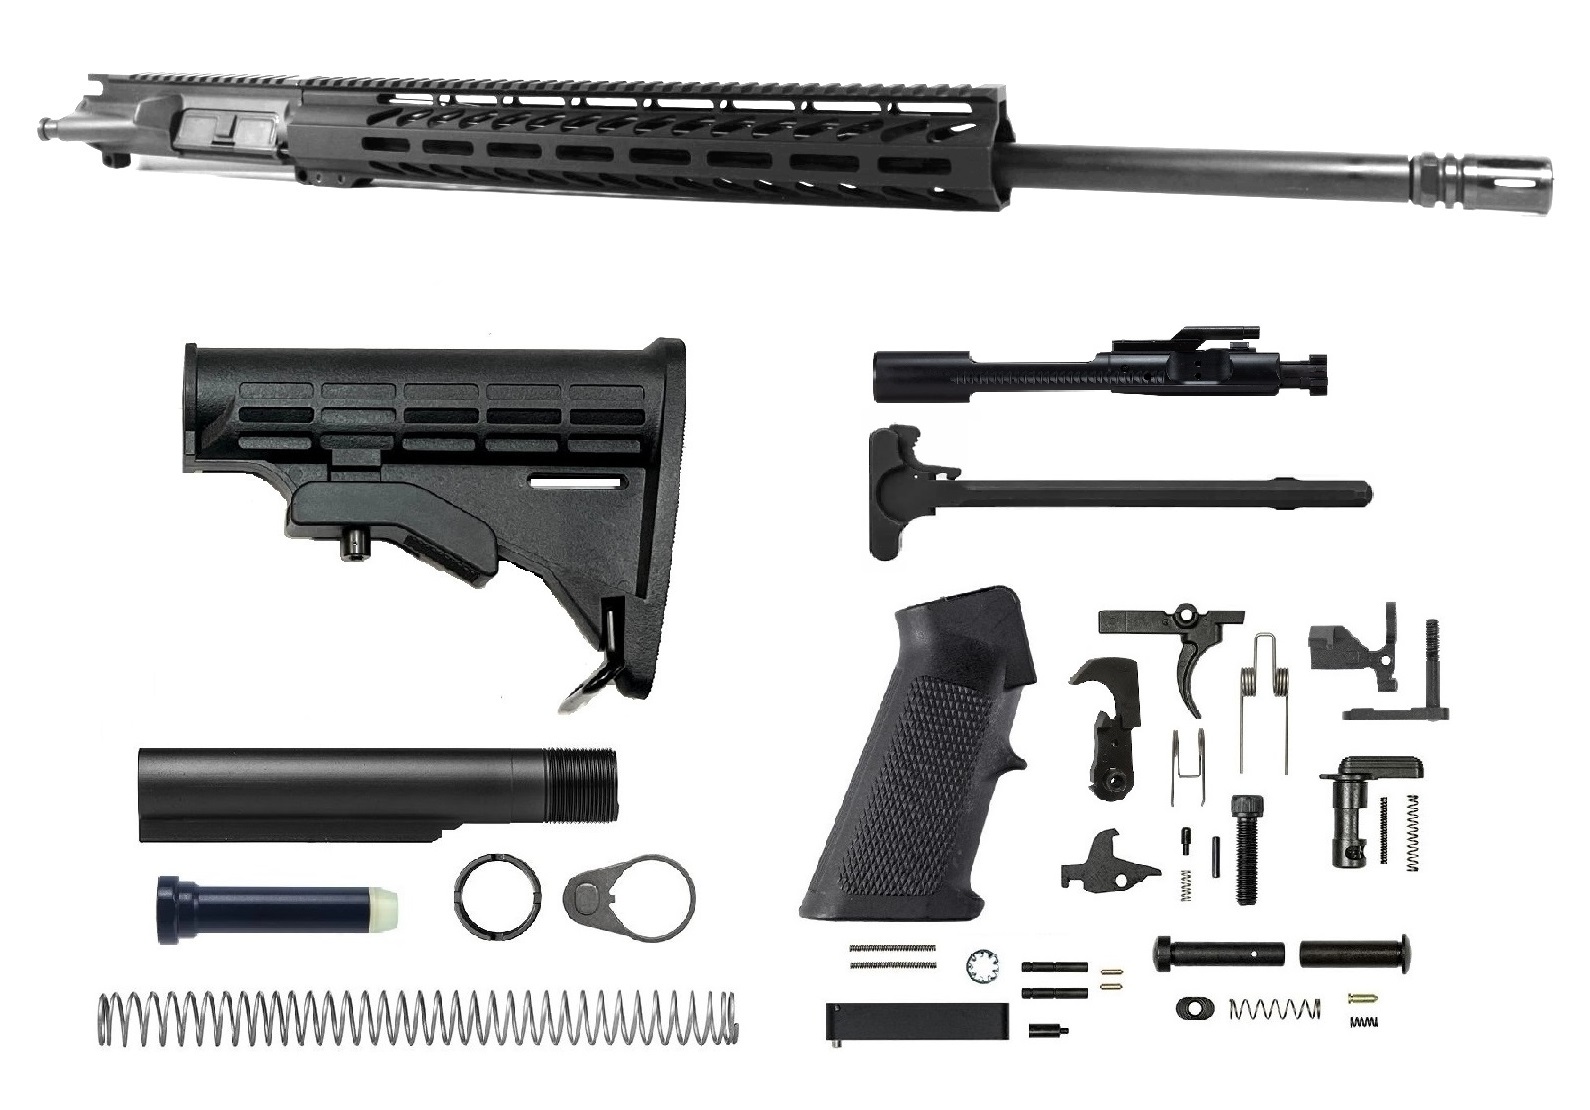 22 inch 224 Valkyrie Melonite Upper Kit | MOA Guarantee